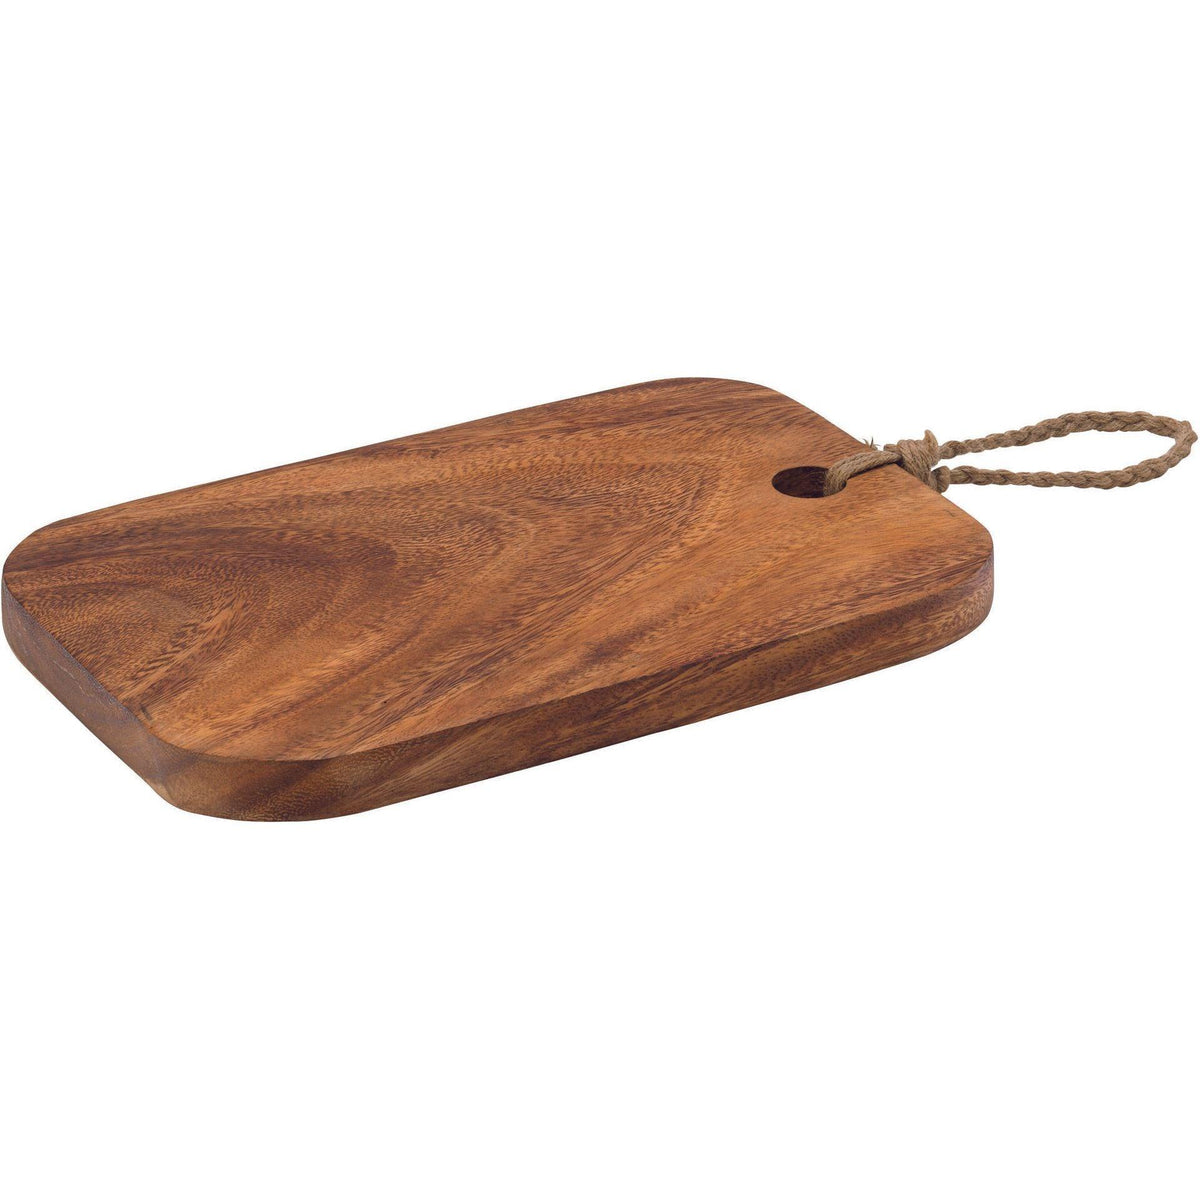 Discovery Acacia Wooden Serving Boards - BESPOKE77